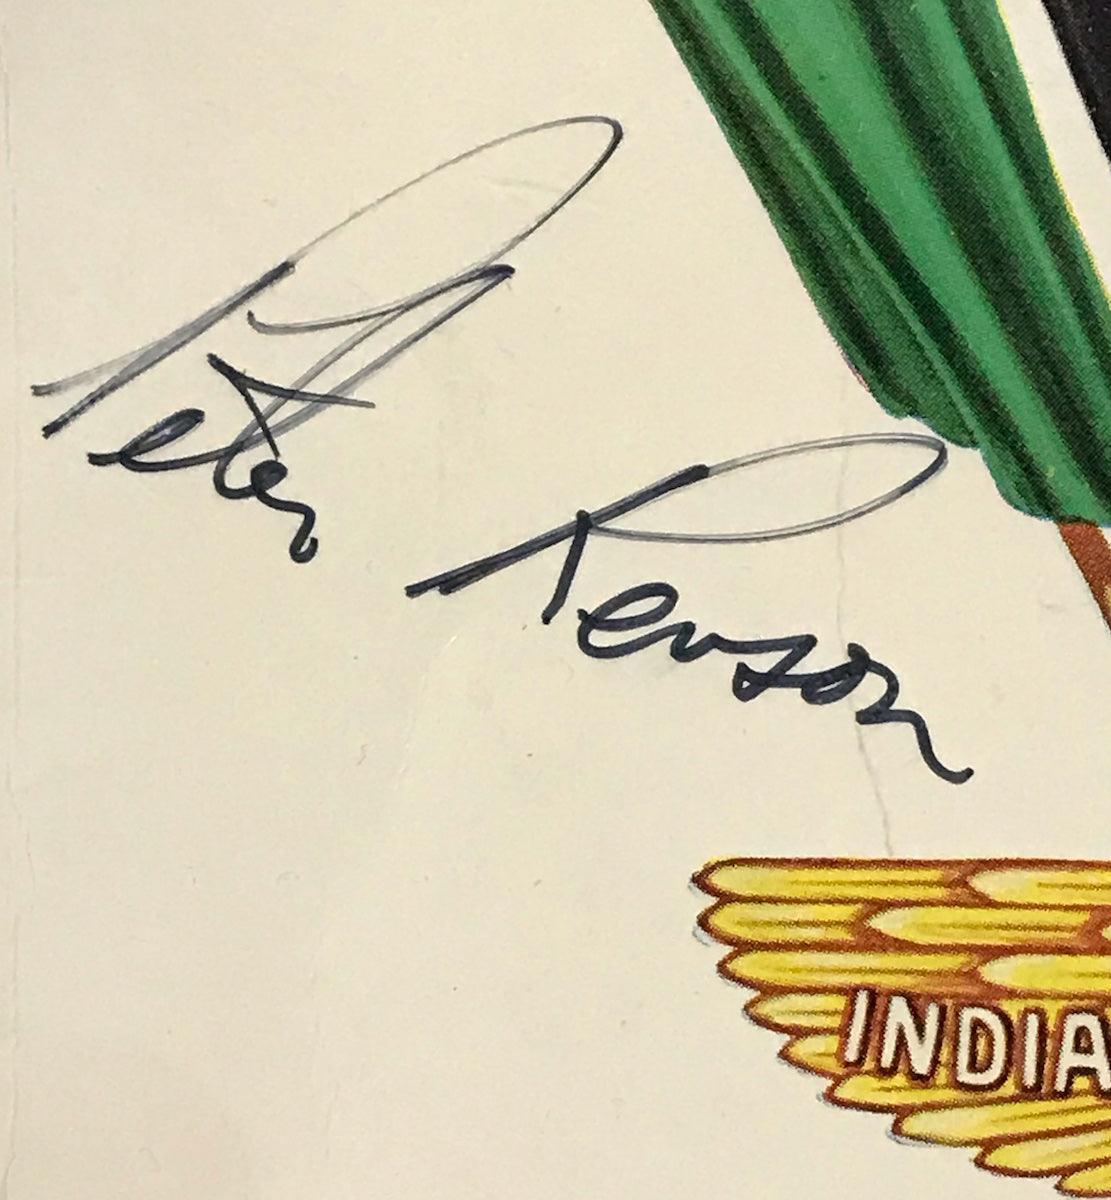 1971 Indianapols 500 Official Program Signed By Peter Revson